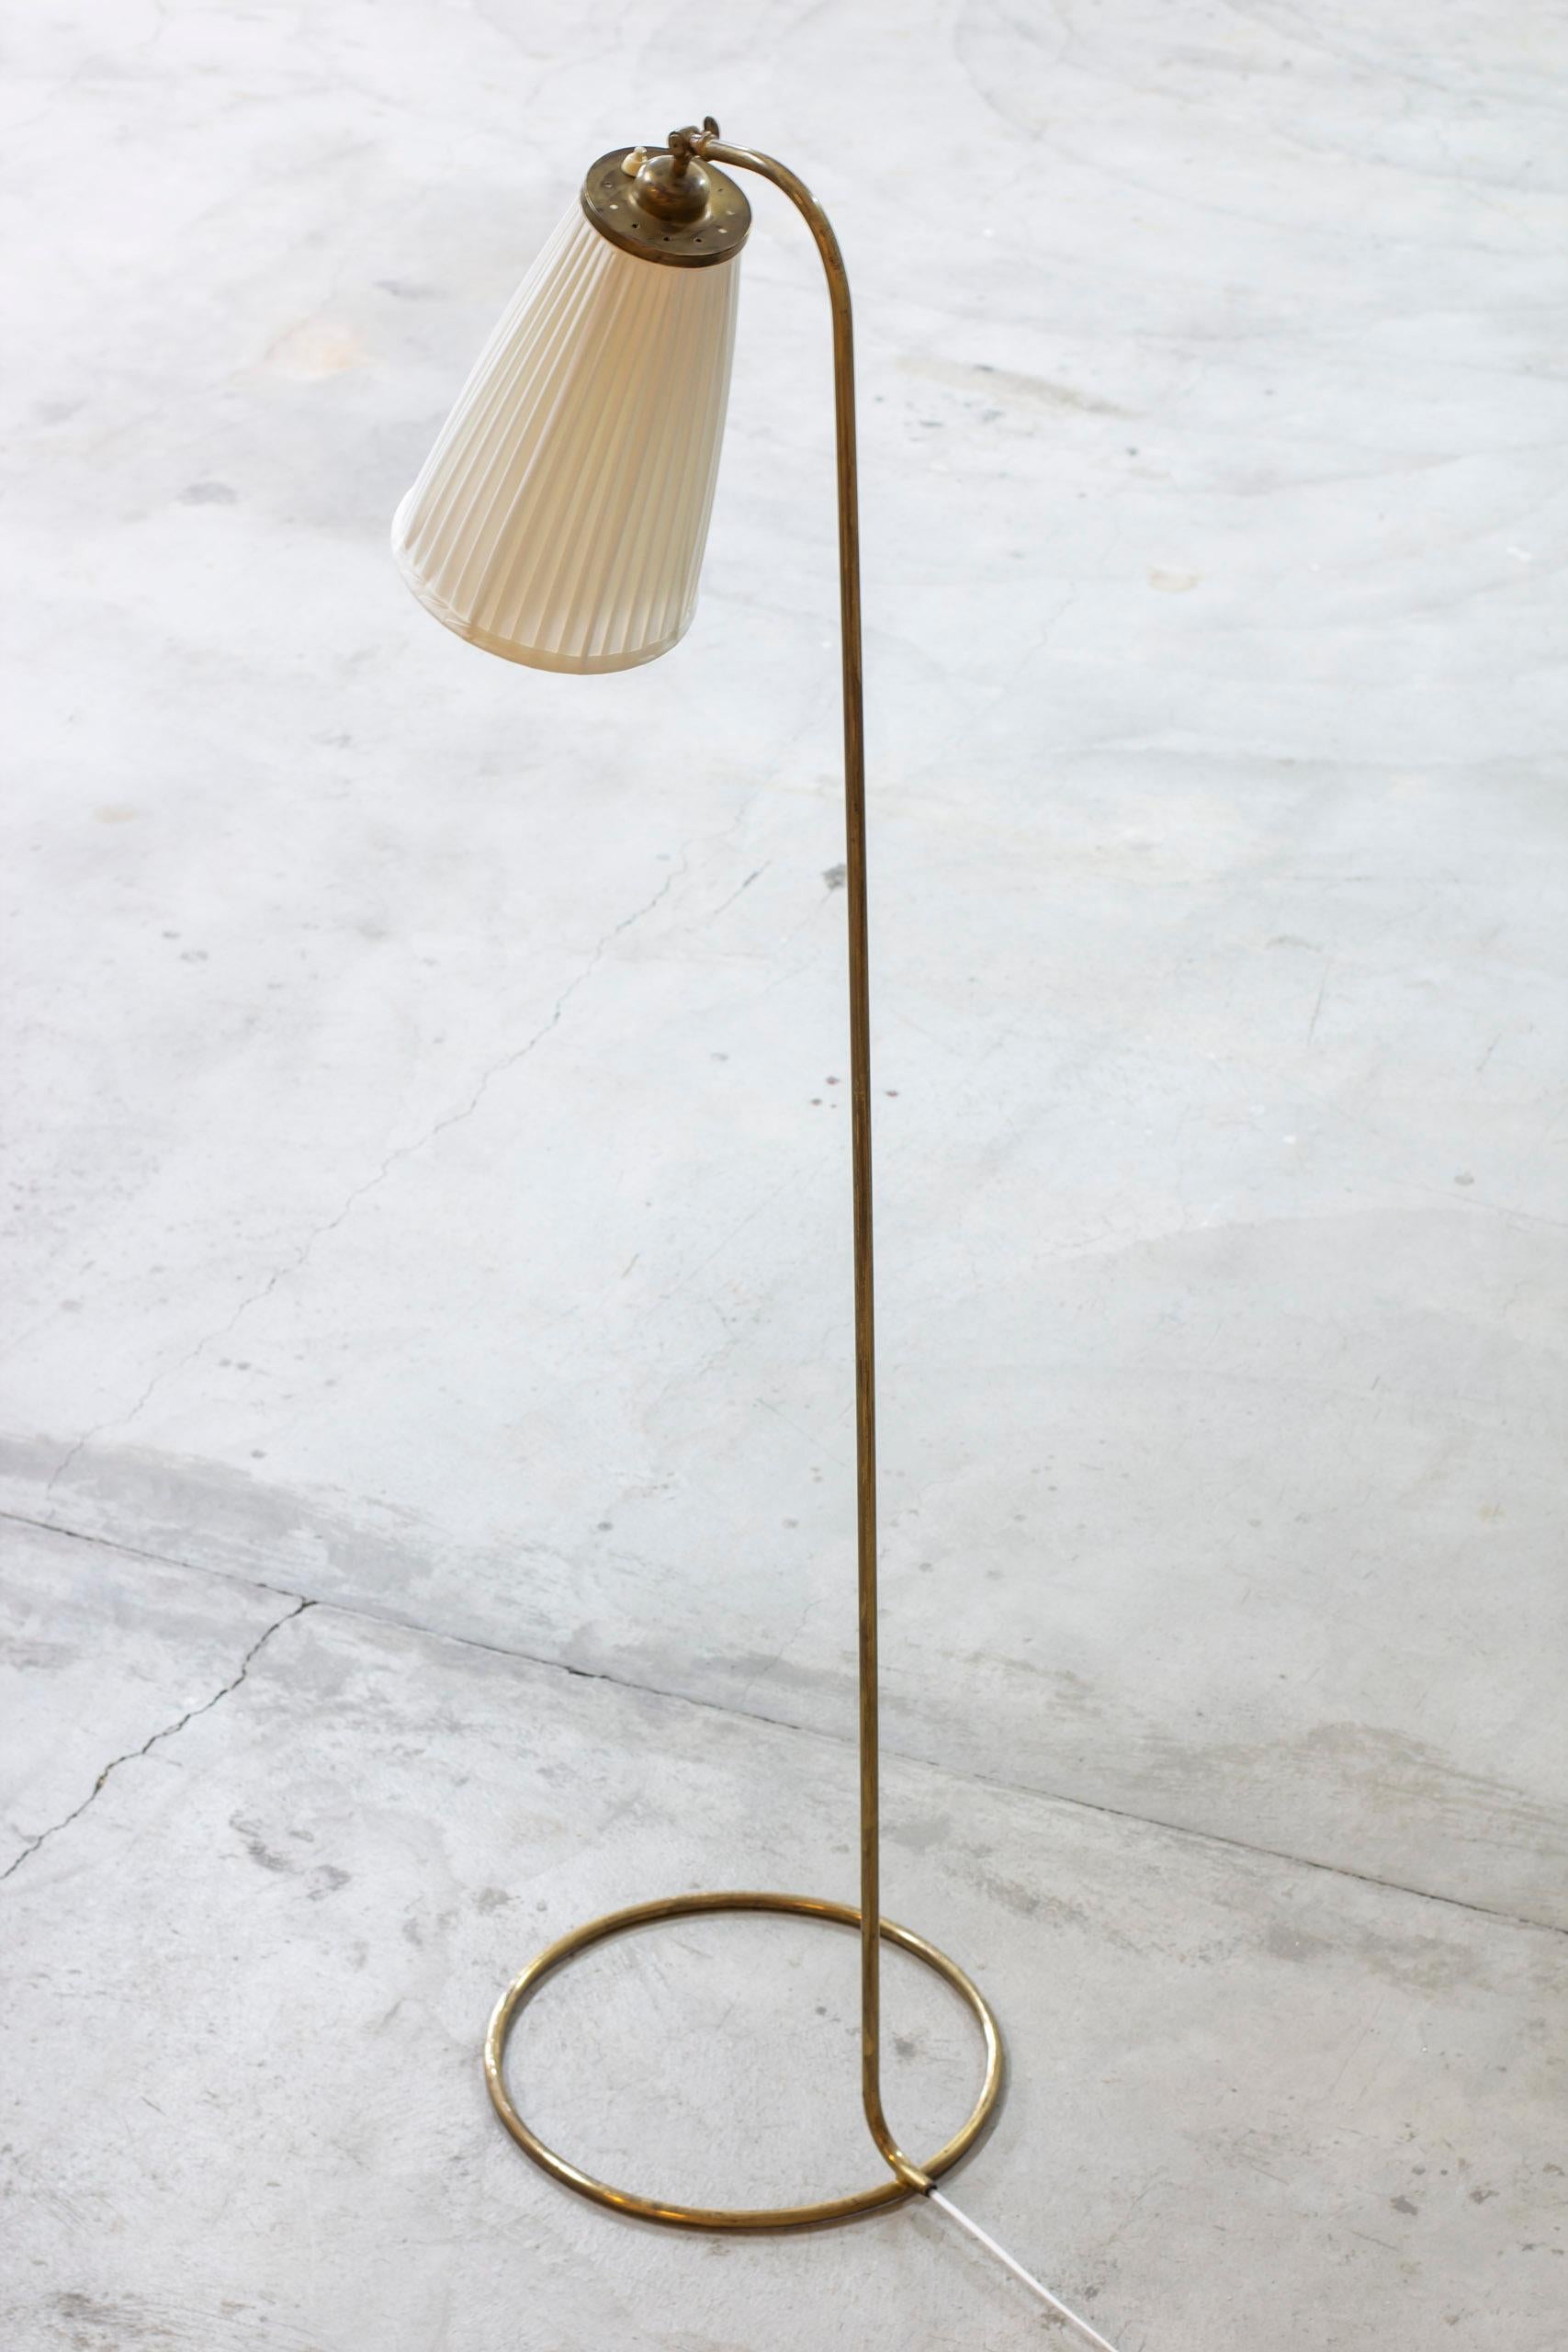 Rare Swedish modern floor lamp by unknown designer and manufacturer. Made from brass with a large hand pleated chintz lamp shade. Shade adjustable in angle. Light switch on top of the lamp shade in working order. Very good vintage condition with